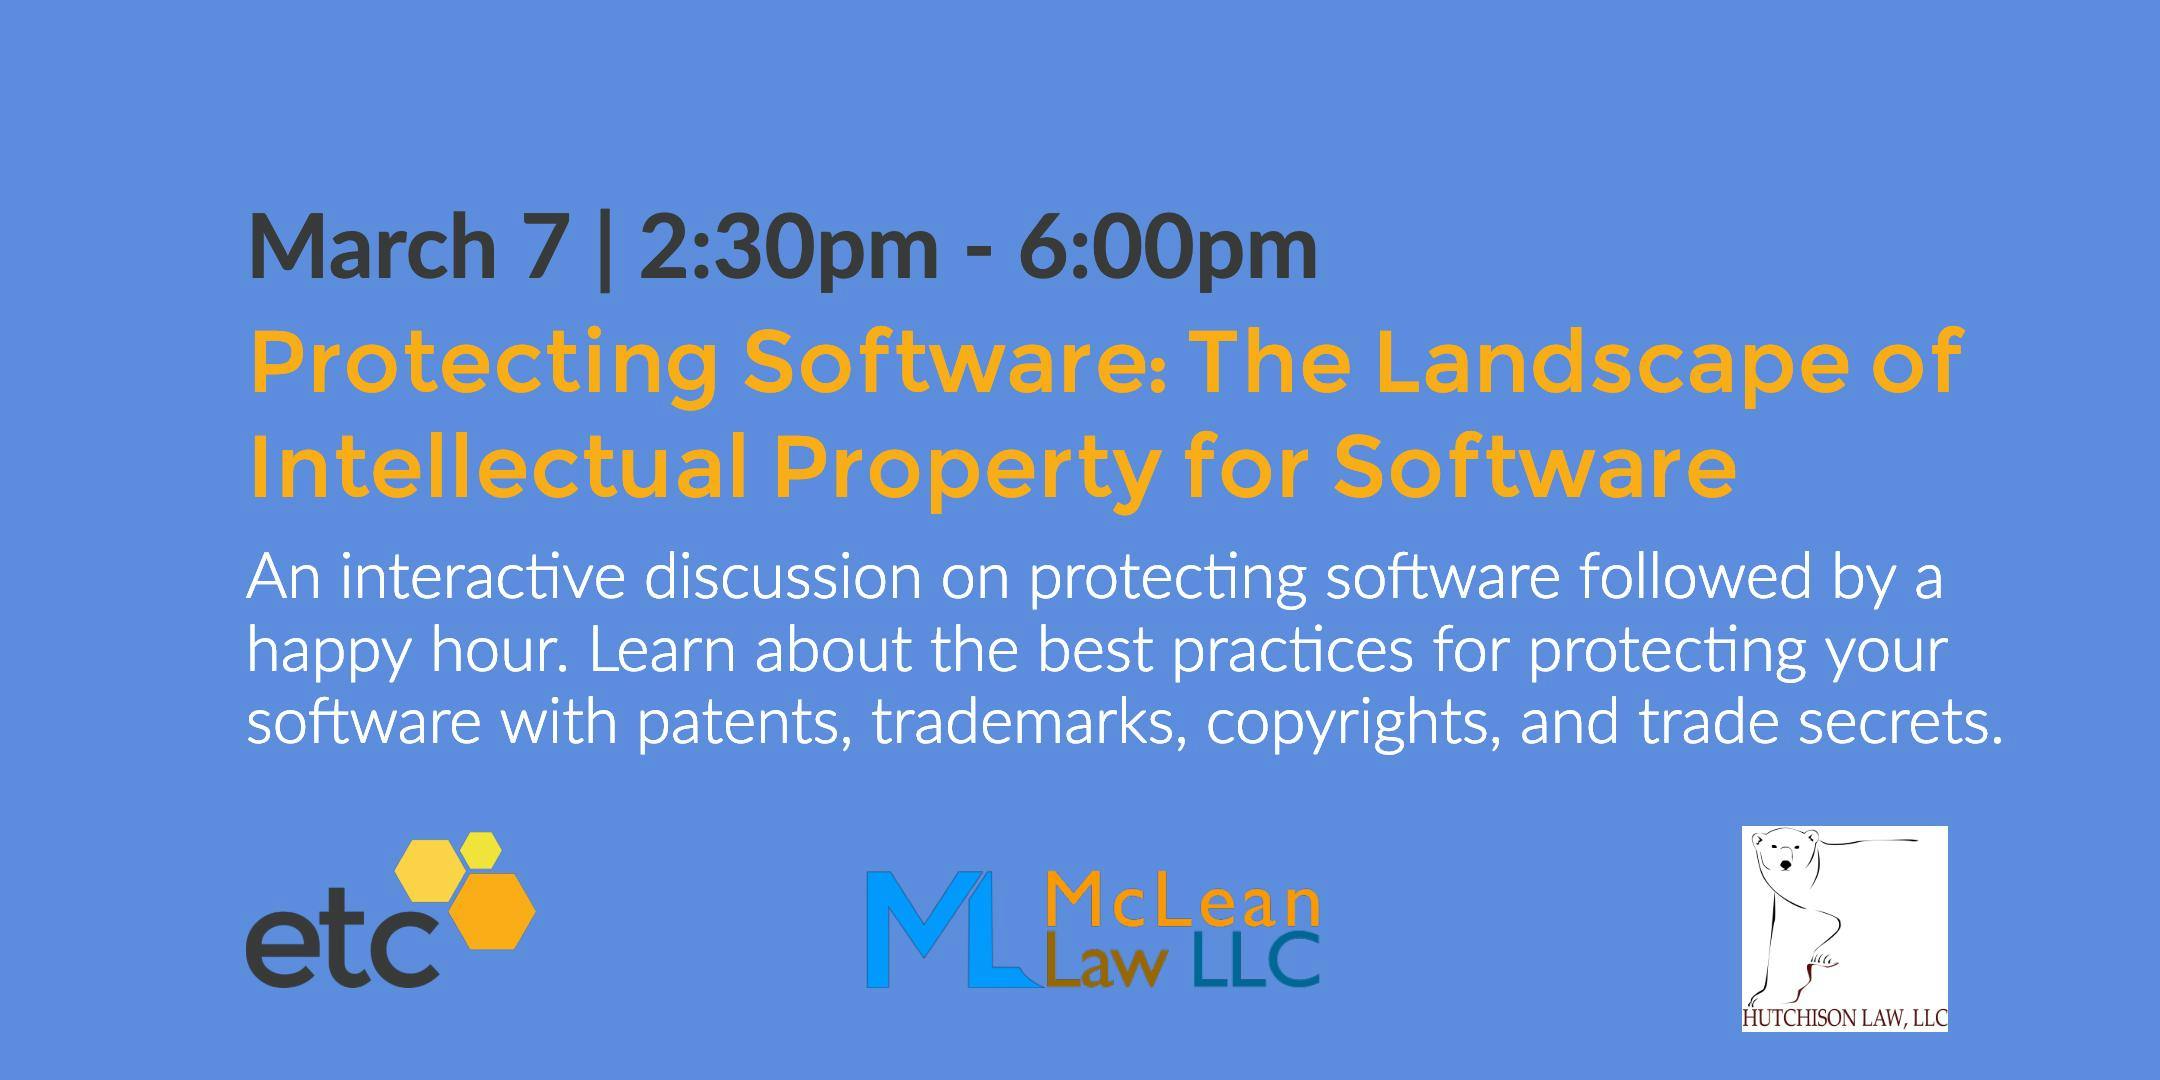 Protecting Software: The Landscape of Intellectual Property for Software